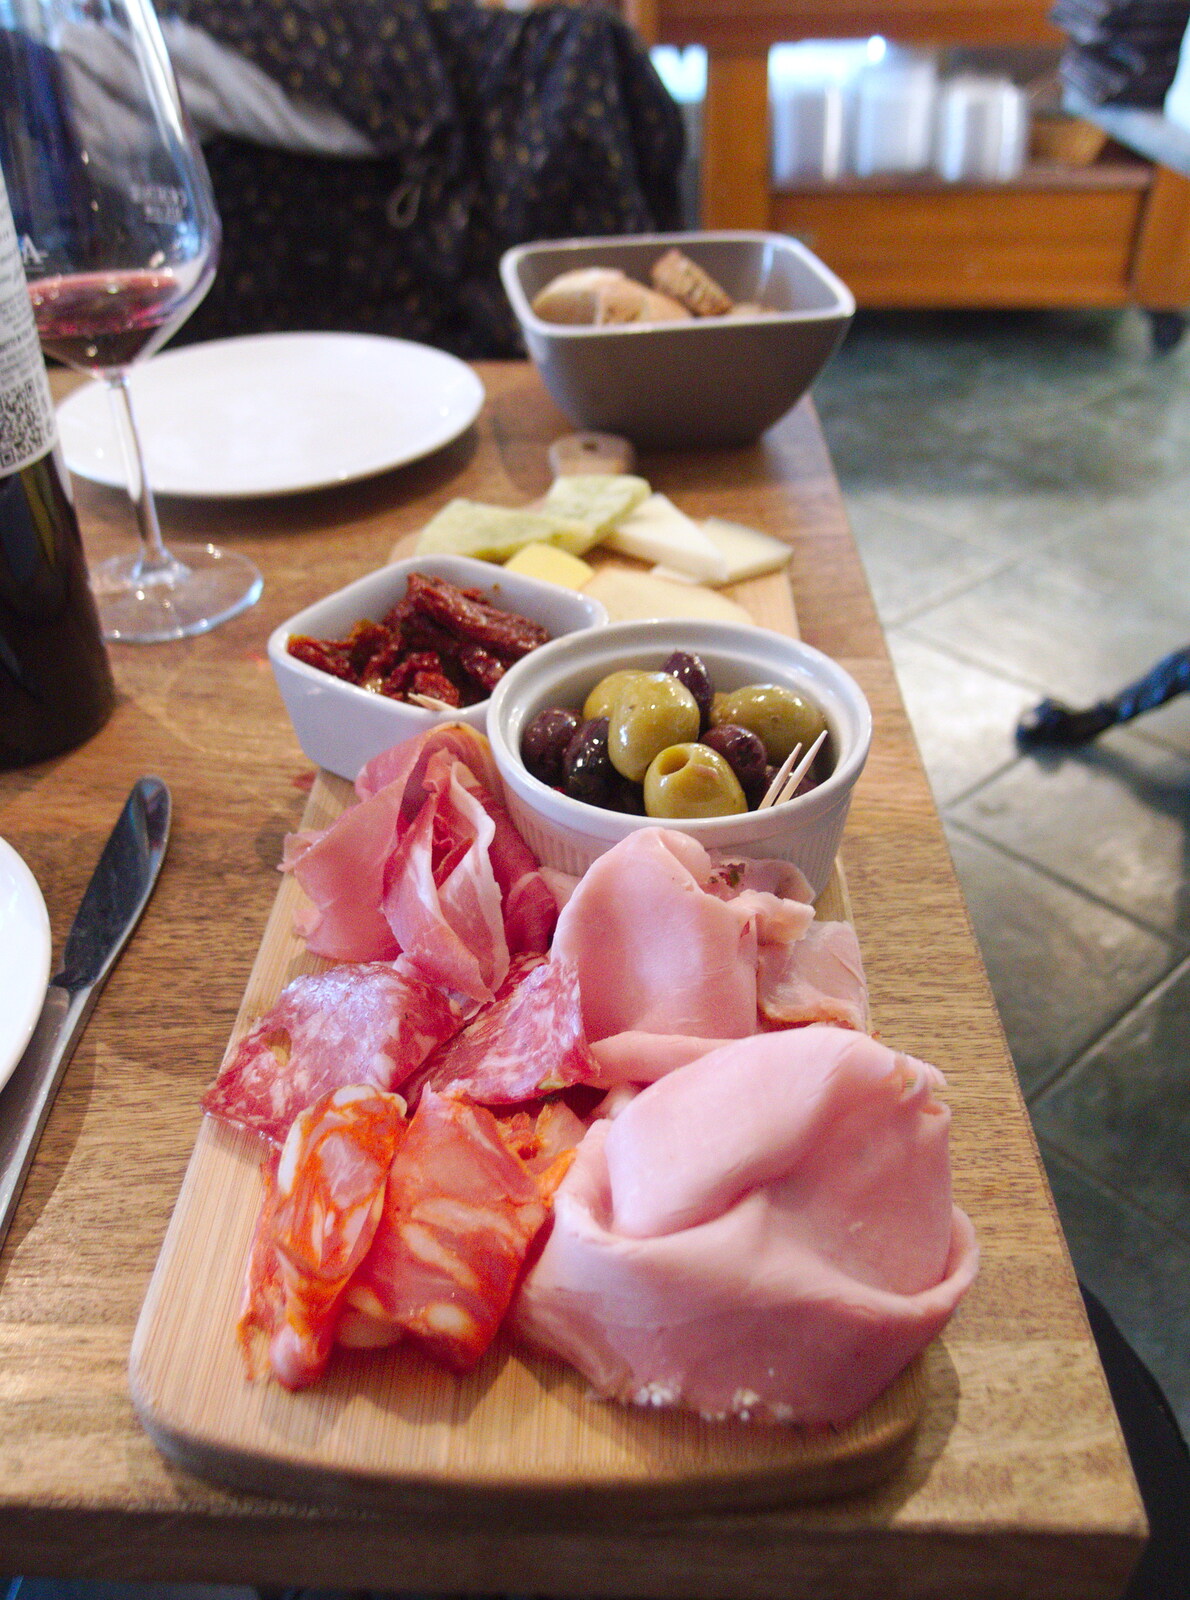 A nice starter of olives and sliced meats from A Musical Night on Mill Road, Cambridge - 8th September 2019